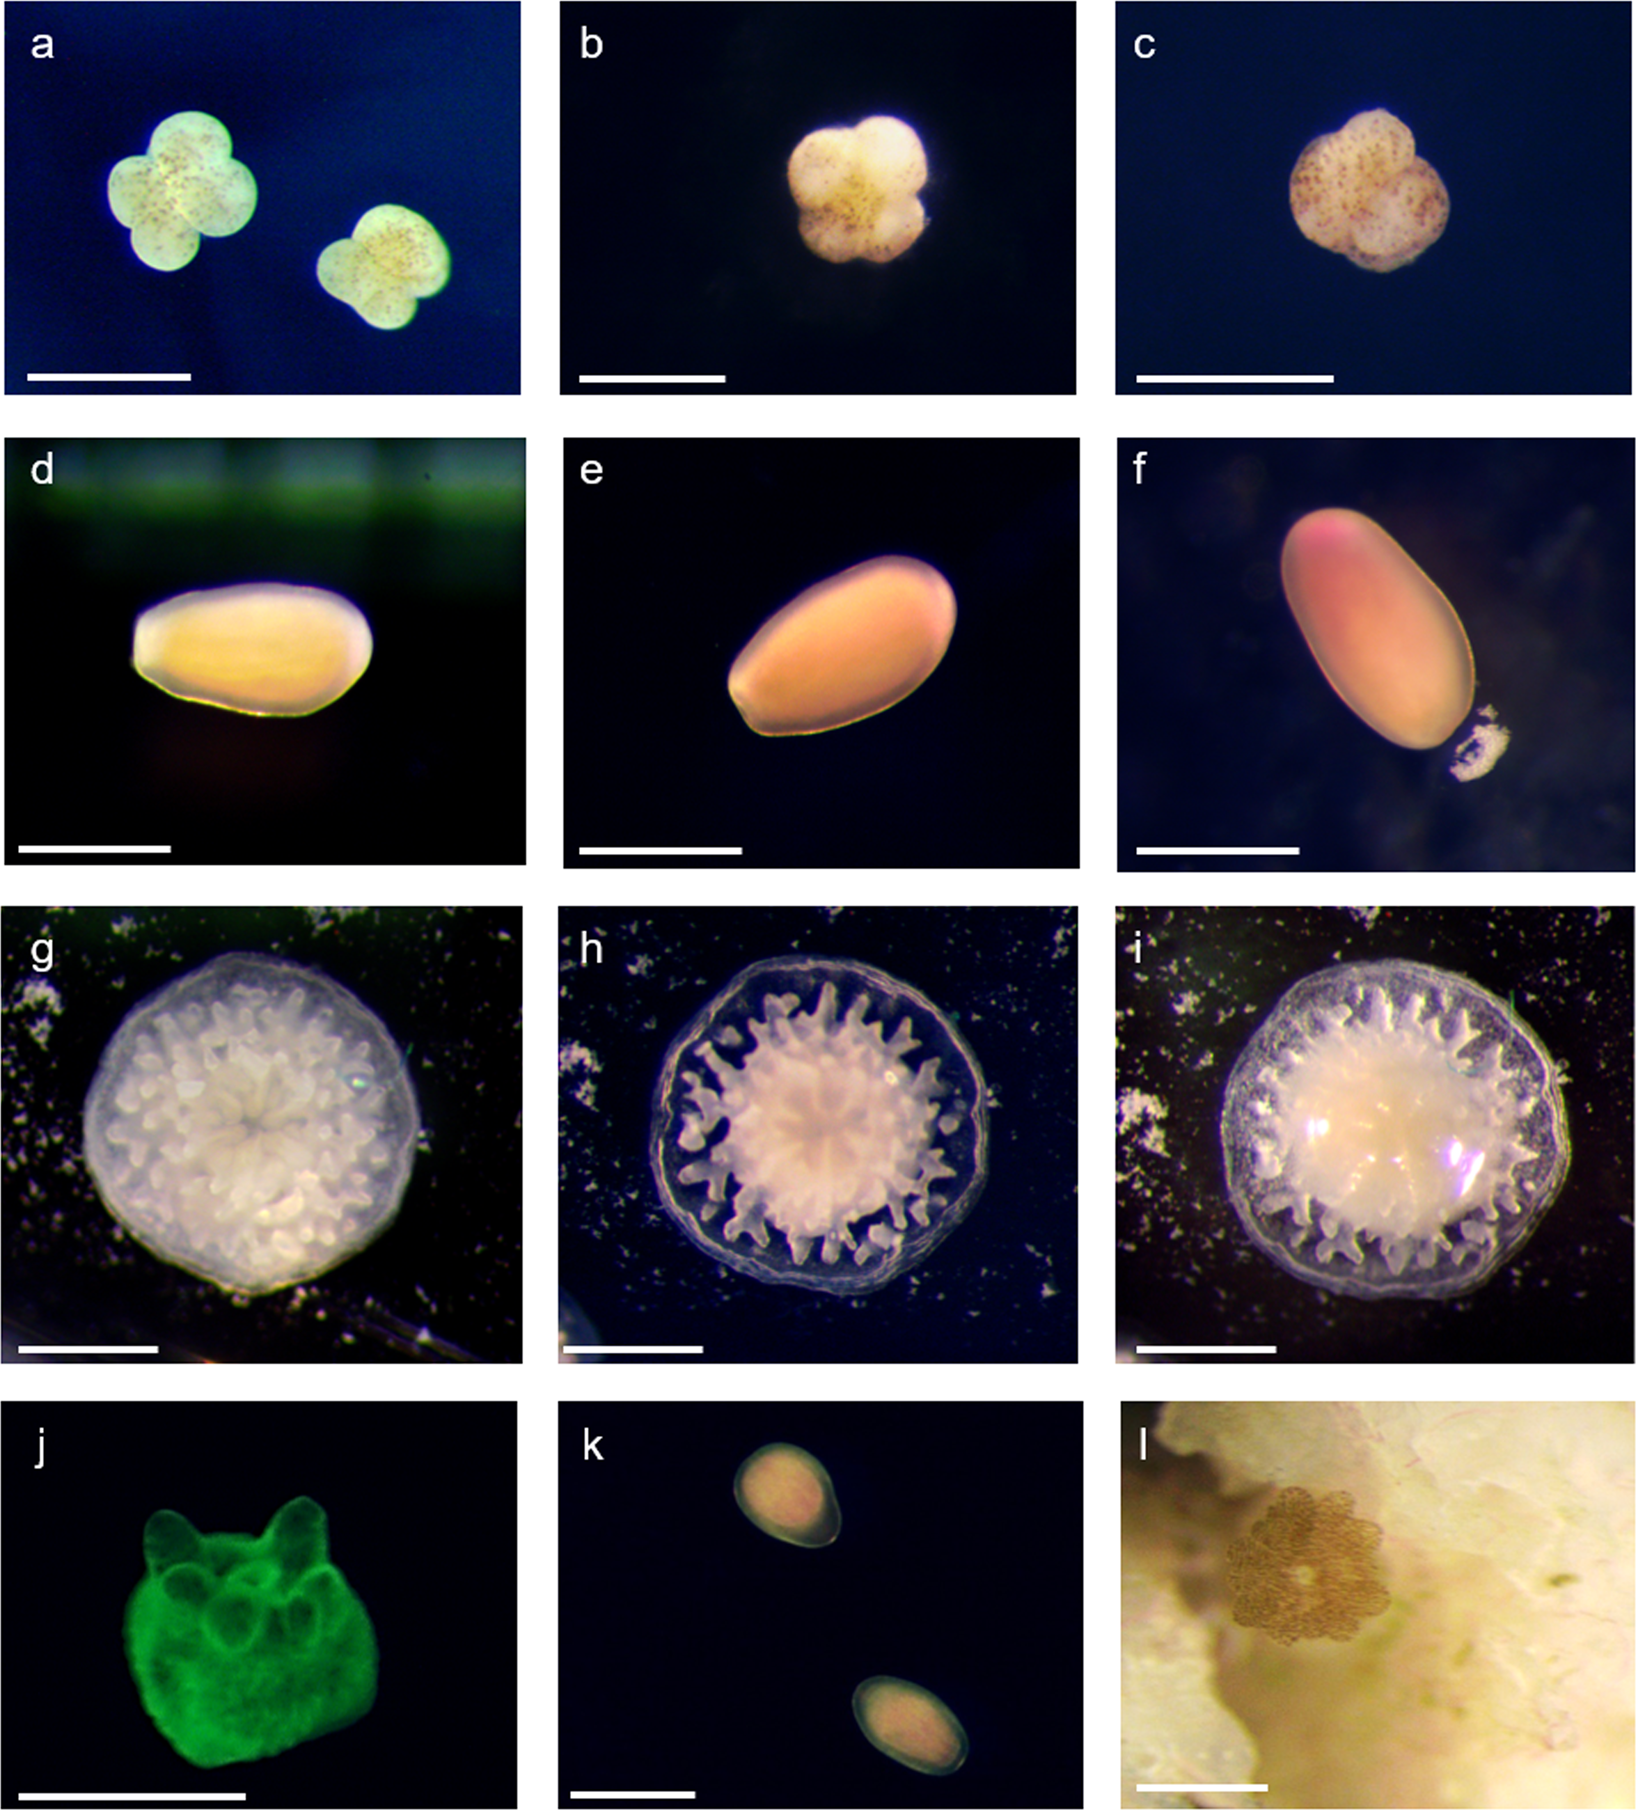 Normal and abnormal embryos and larvae of sand dollar S. mirabilis